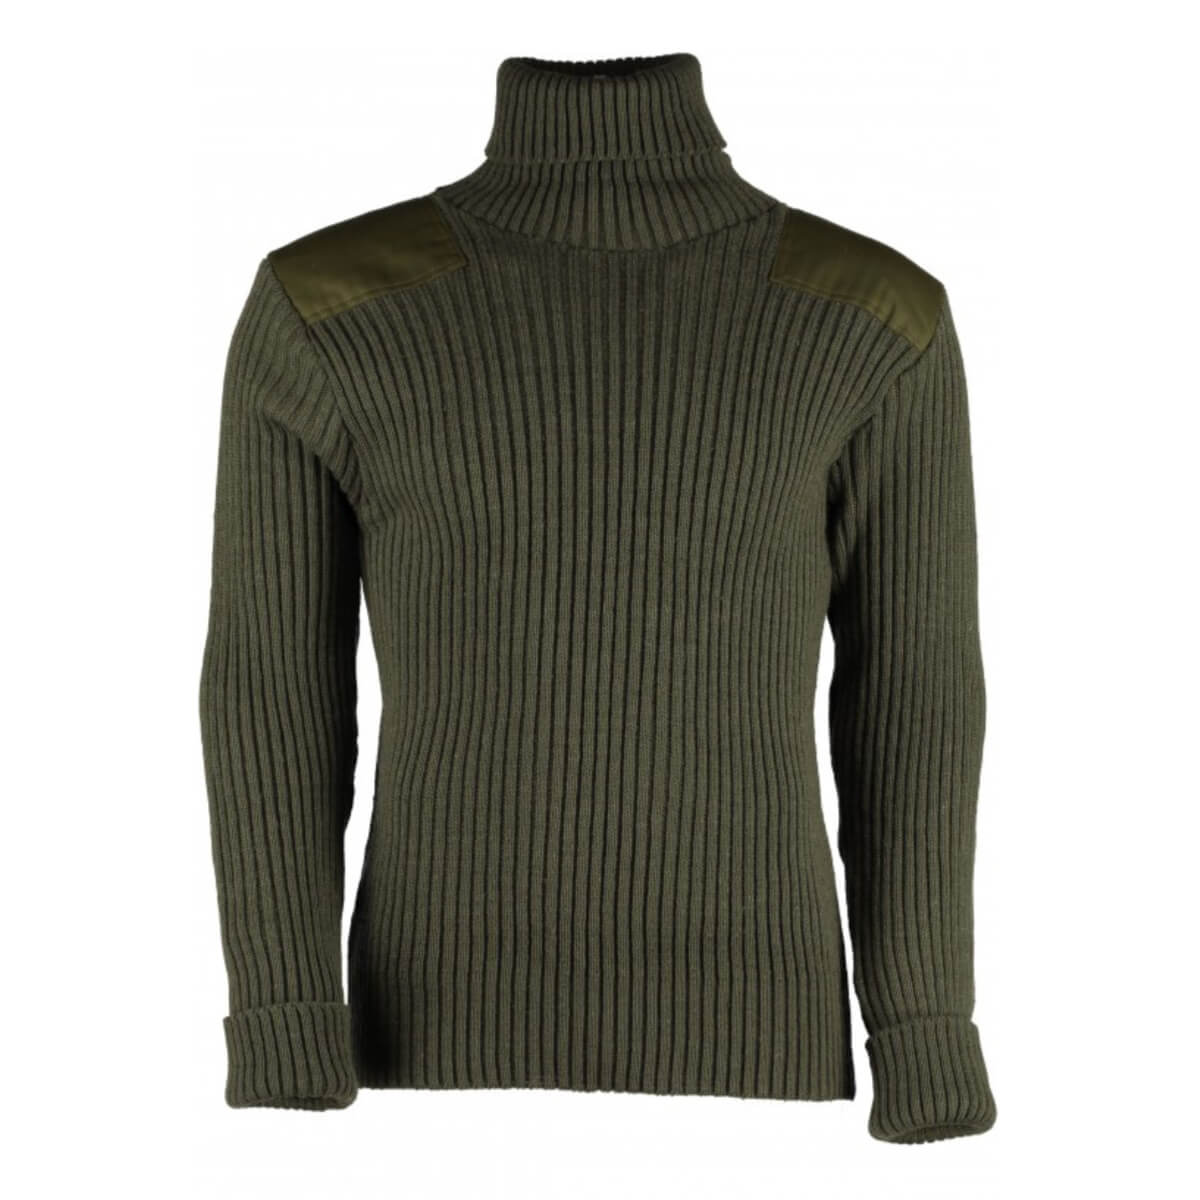 Chatham Woolly Pully Roll Neck Sweater